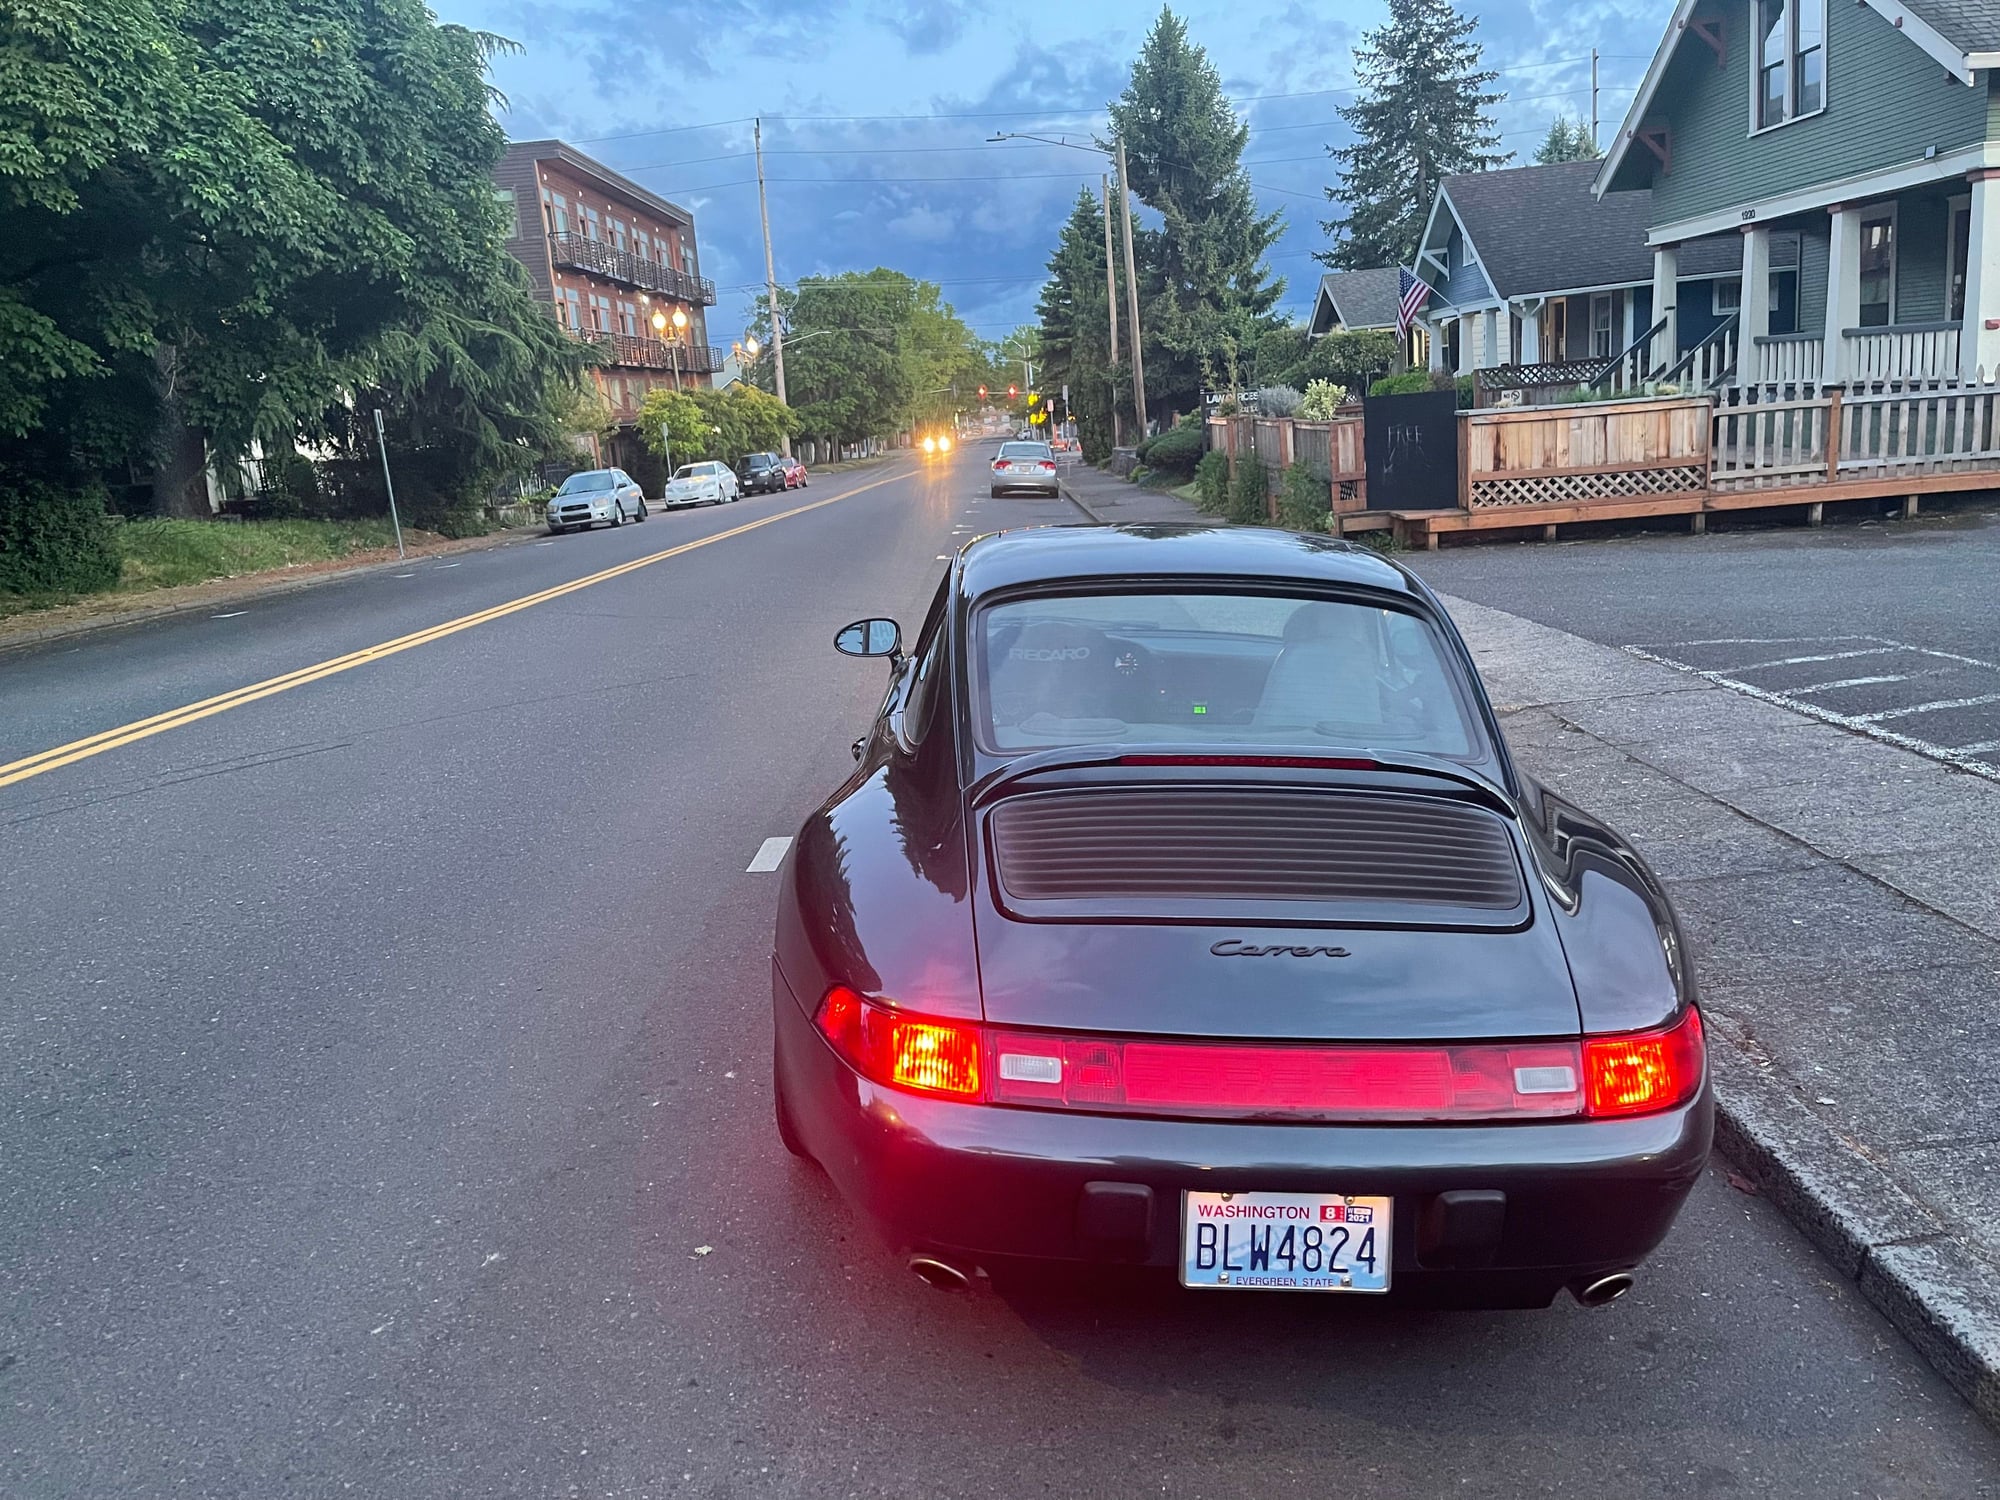 1995 Porsche 911 - FS: 1995 Aventurine Green 911 6mt - Used - VIN WP0AA299Xss320514 - 109,000 Miles - 6 cyl - 2WD - Manual - Coupe - Other - Vancouver, WA 98663, United States